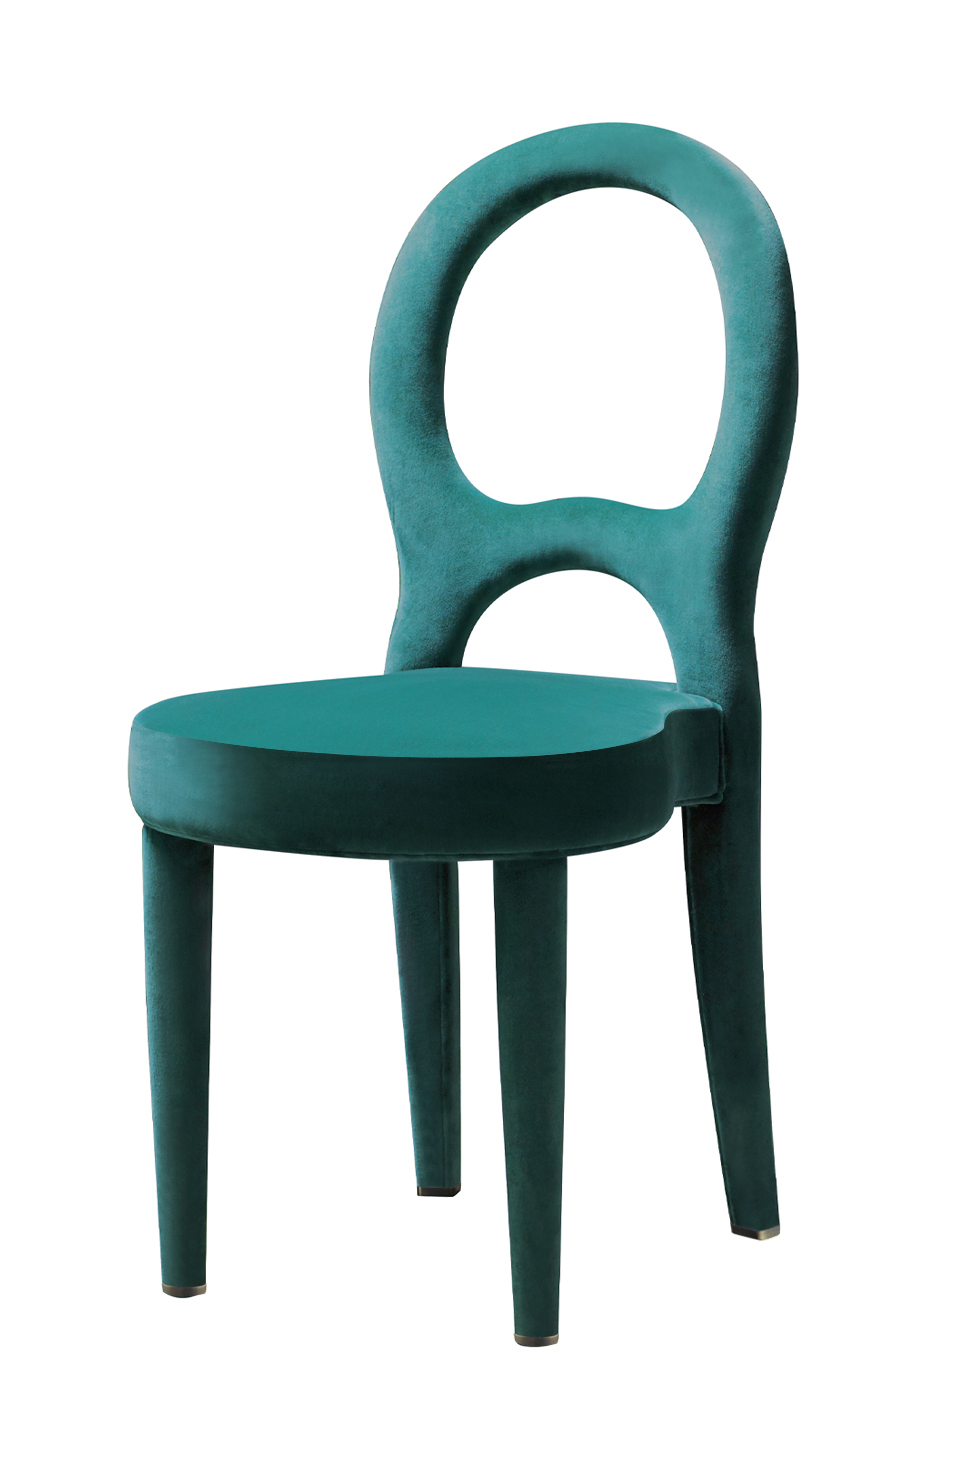 Bilou Bilou is a dining chair covered in velvet and linen or nappa leather available in different colors and in the versions standard, large and kids. Bilou Bilou is the most iconic dining chair from Promemoria's catalogue | Promemoria